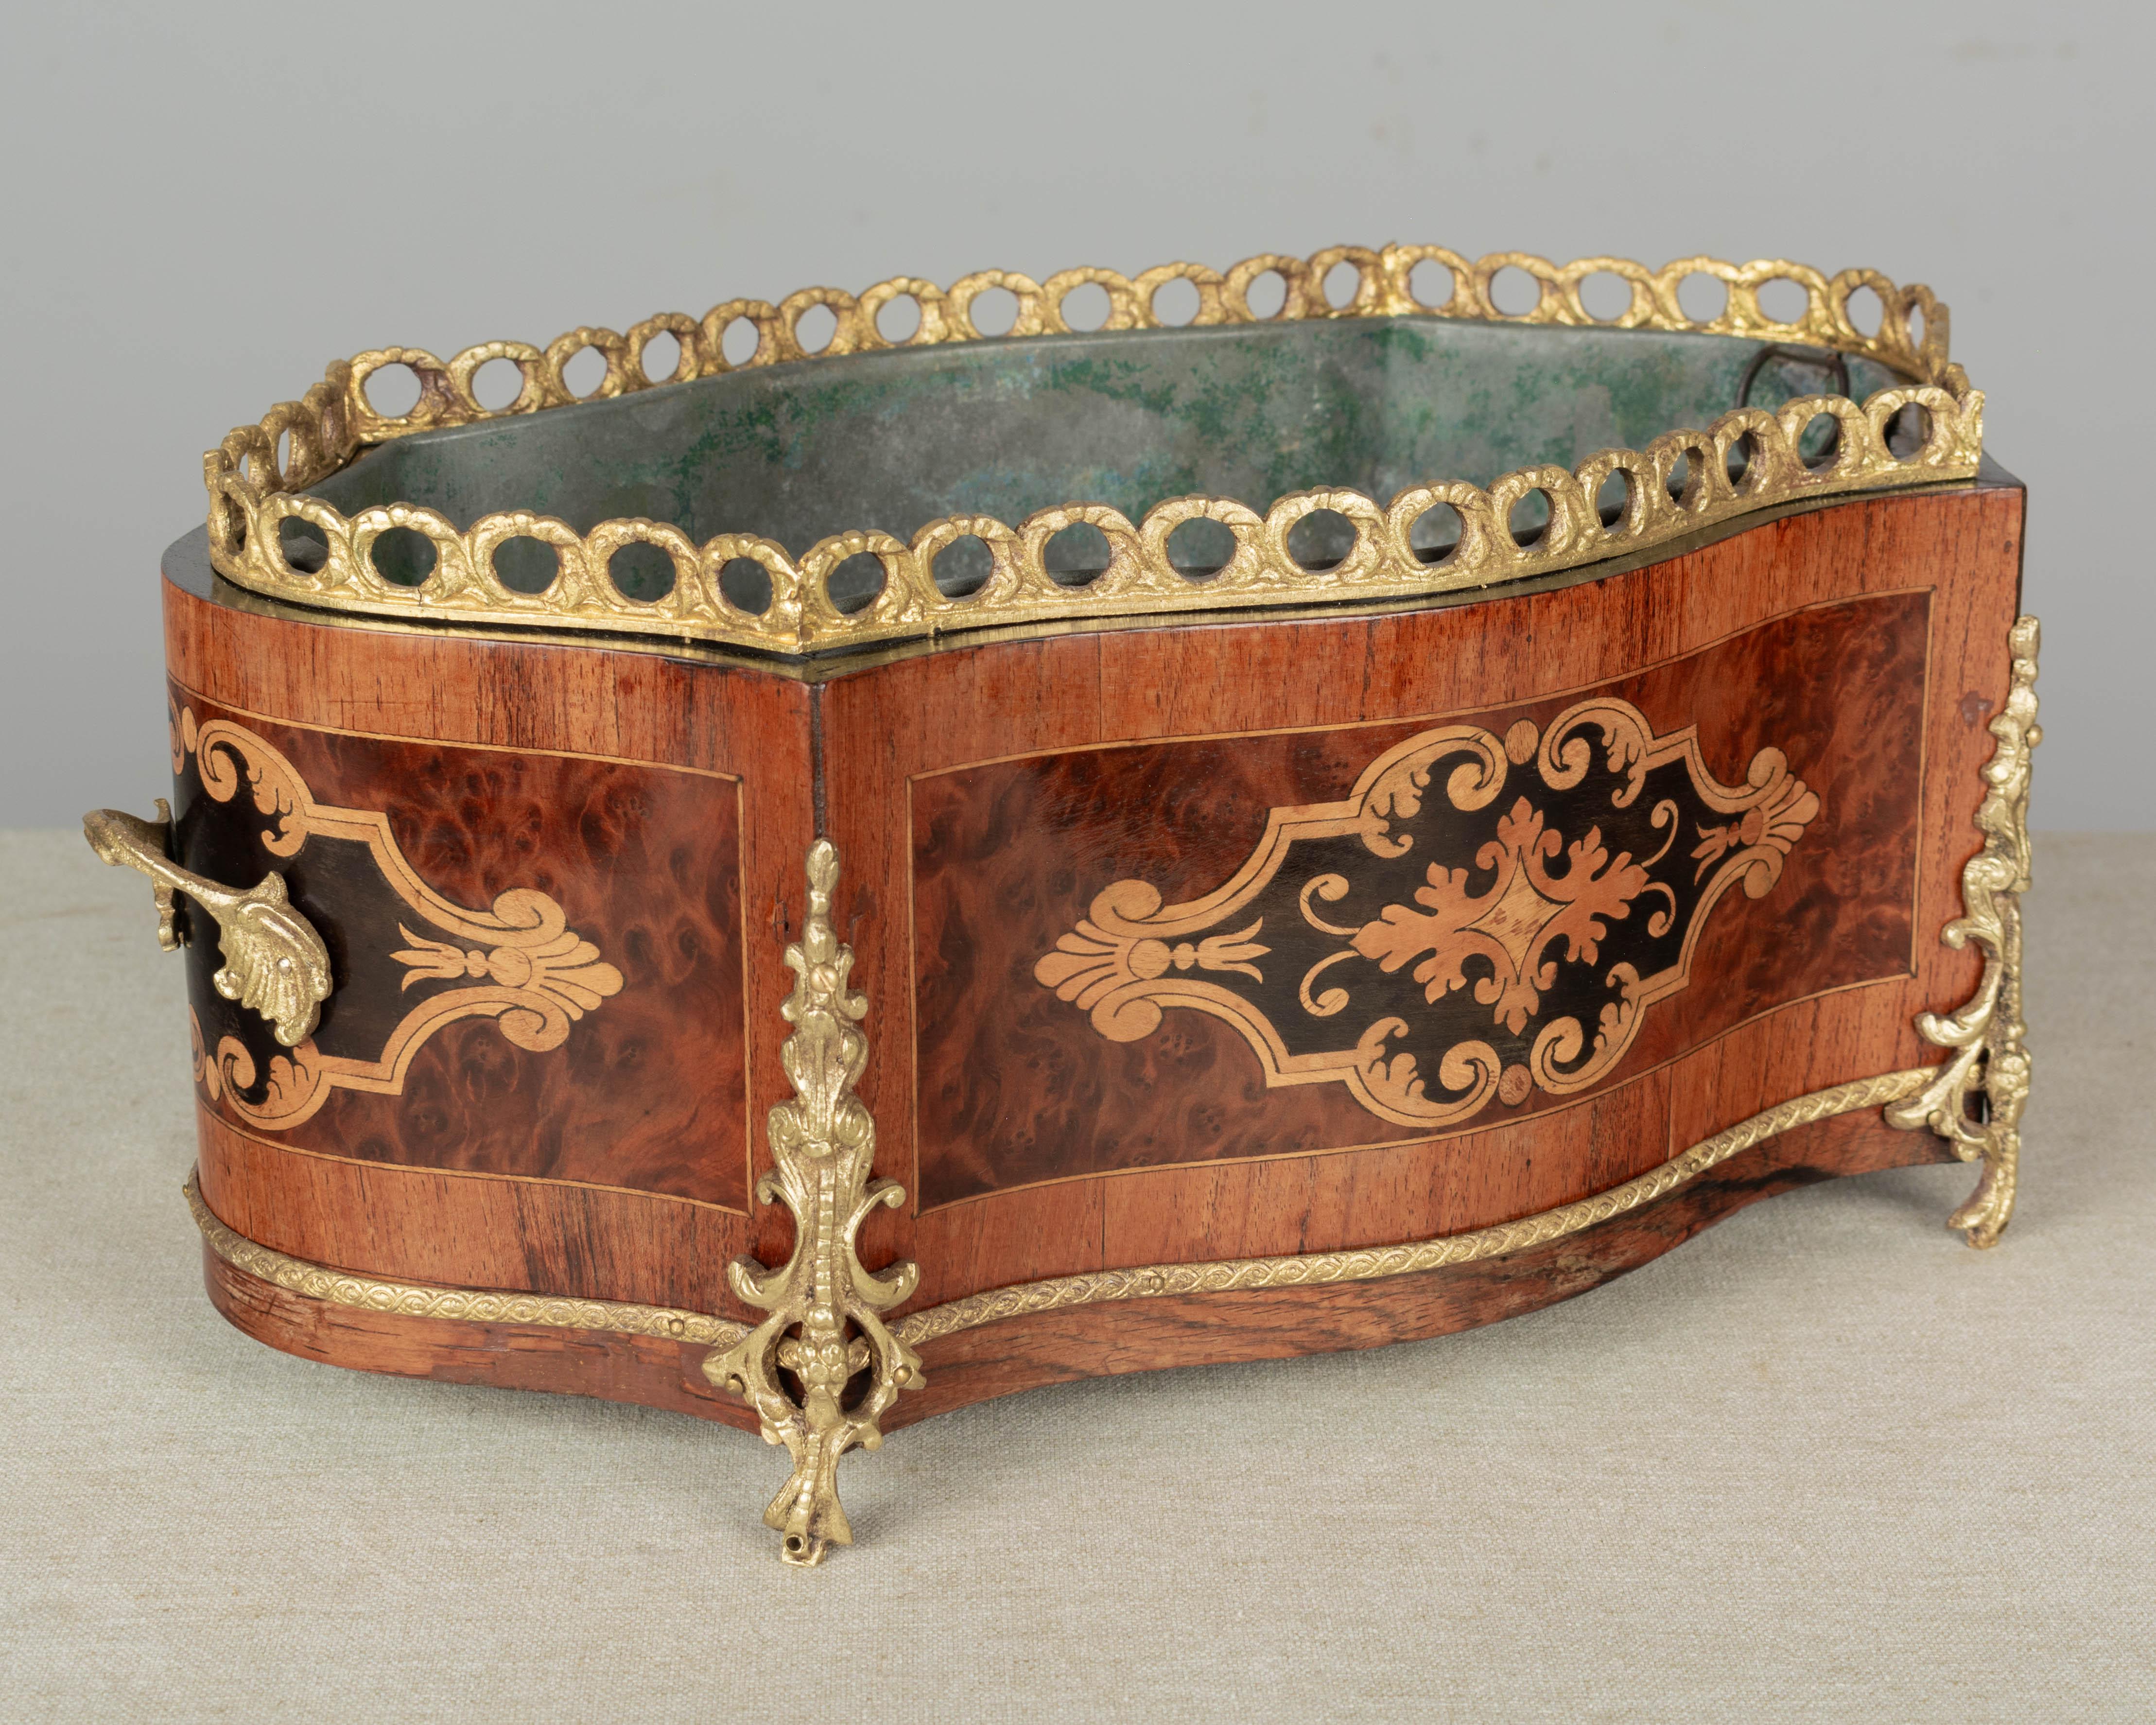 An early 20th century French Napoleon III marquetry jardinière with inlaid veneers of mahogany, burled elm and walnut wood with ebonized trim. Bronze-mounted with two handles, gallery and trim. Original zinc liner, repaired. A beautiful planter for